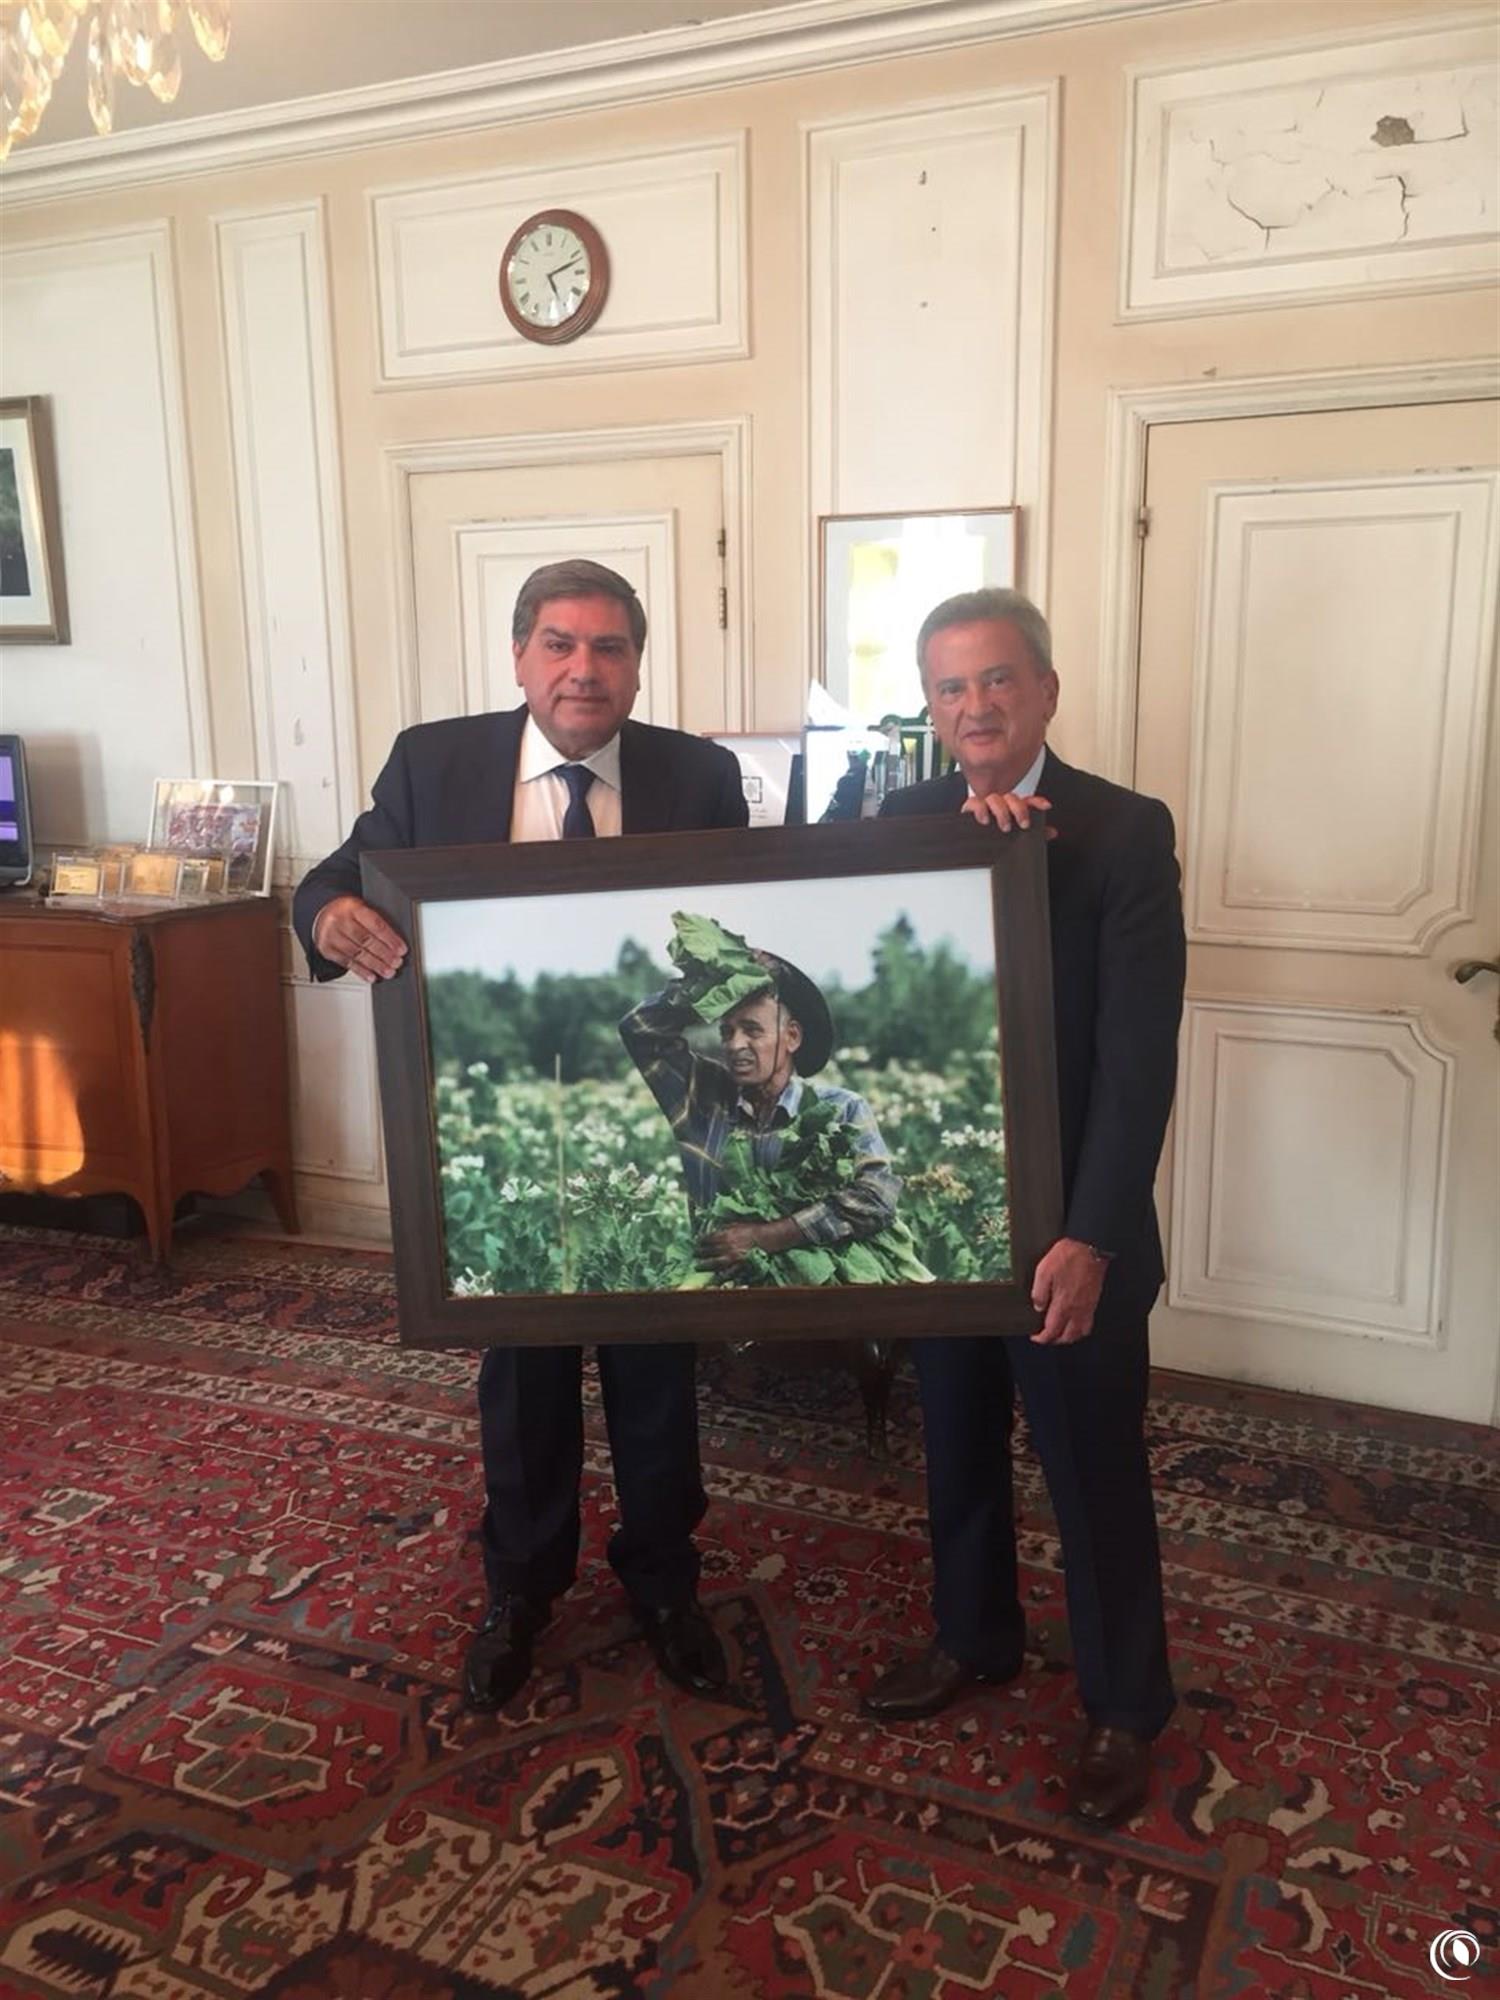 Seklaoui to brief Salemeh about the Regie’s financial results and to offer him a photo reflecting tobacco farmers’ hard work